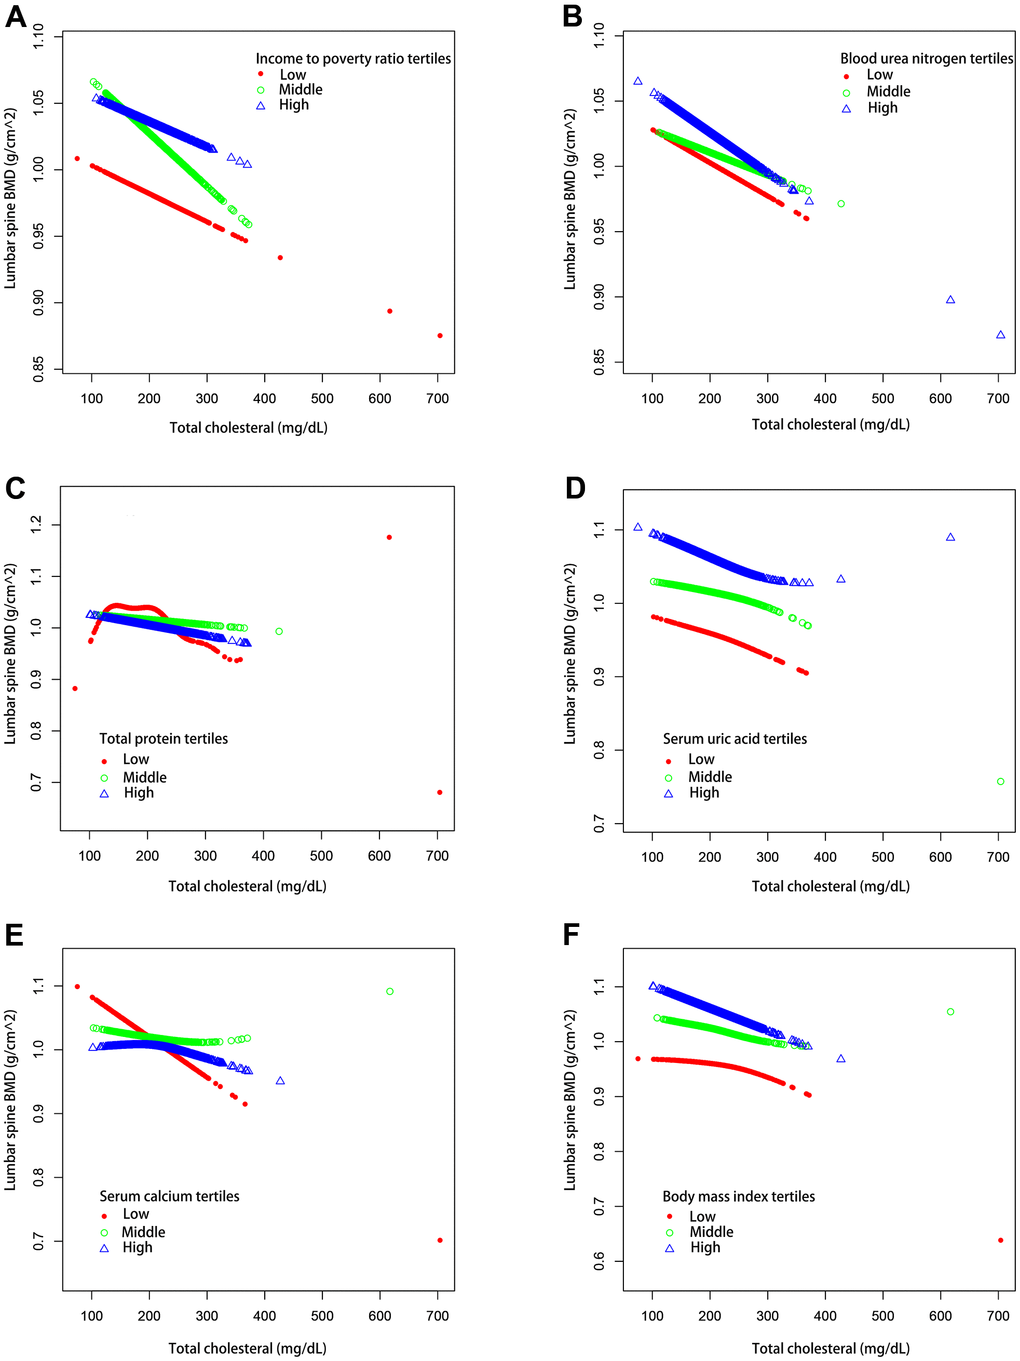 The association between serum total cholesterol and lumbar spine BMD stratified by tertiles of different continuous variables. (A) Stratified by income poverty rate tertiles. Age, Sex, race / ethnicity, physical activity, blood urea nitrogen, total protein, serum uric acid, blood calcium and body mass index were adjusted. (B) Stratified by blood urea nitrogen tertiles. Age, Sex, race / ethnicity, physical activity, income poverty rate, total protein, serum uric acid, blood calcium and body mass index were adjusted. (C) Stratified by total protein tertiles. Age, Sex, race / ethnicity, physical activity, income poverty rate, blood urea nitrogen, serum uric acid, blood calcium and body mass index were adjusted. (D) Stratified by serum uric acid tertiles. Age, Sex, race / ethnicity, physical activity, income poverty rate, blood urea nitrogen, total protein, blood calcium and body mass index were adjusted. (E) Stratified by blood calcium tertiles. Age, Sex, race / ethnicity, physical activity, income poverty rate, blood urea nitrogen, total protein, serum uric acid and body mass index were adjusted. (F) Stratified by body mass index tertiles. Age, Sex, race / ethnicity, physical activity, income poverty rate, blood urea nitrogen, total protein, serum uric acid and blood calcium were adjusted.